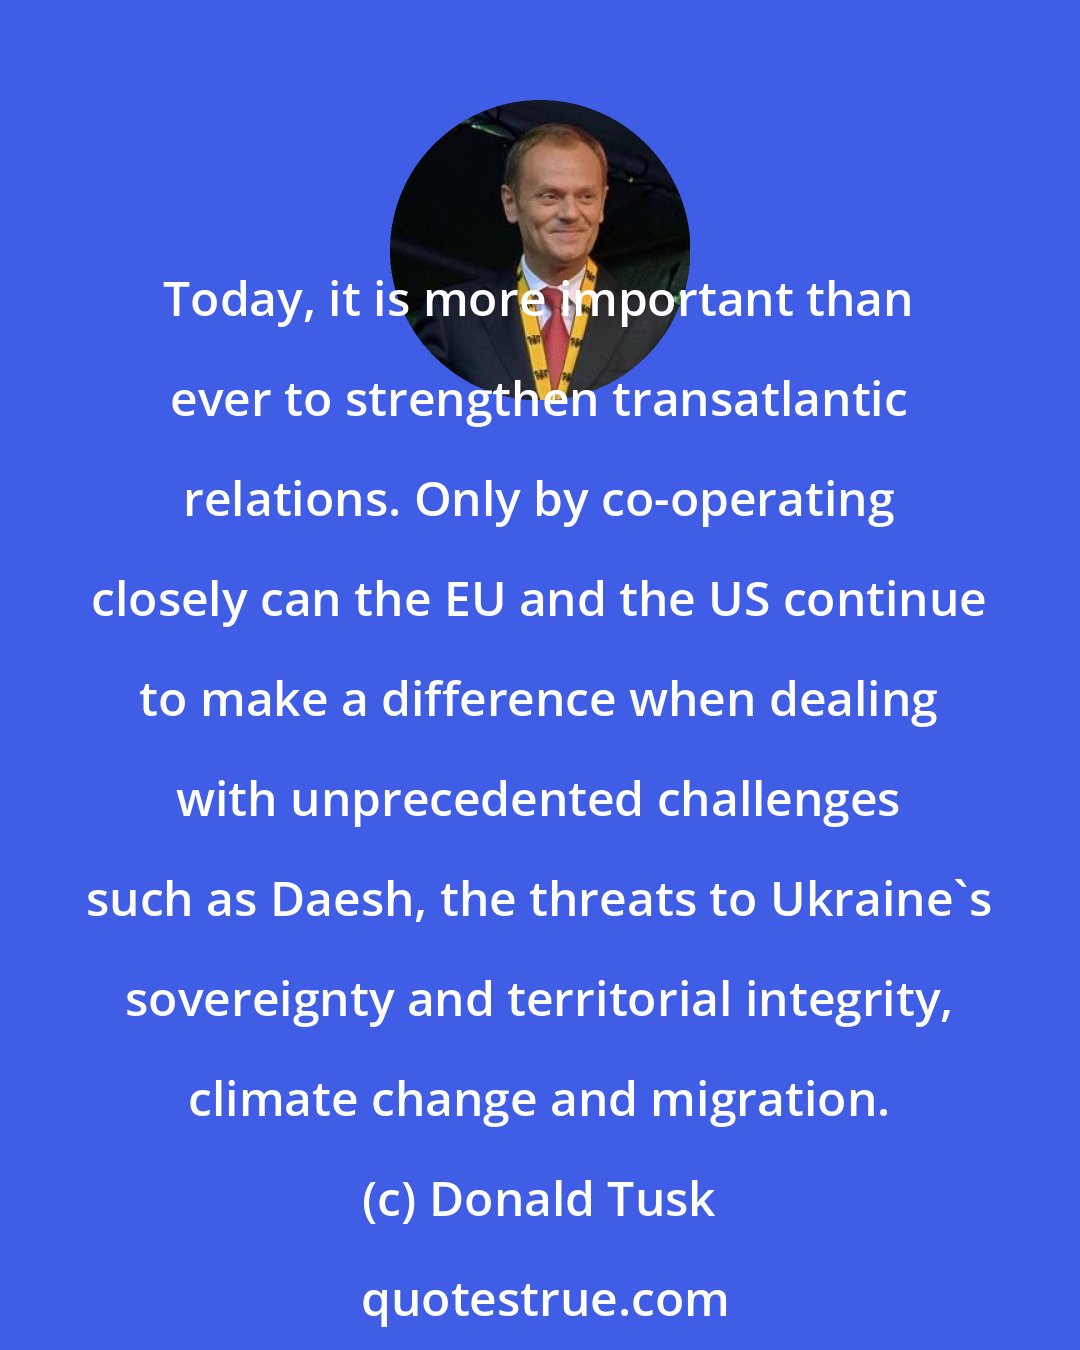 Donald Tusk: Today, it is more important than ever to strengthen transatlantic relations. Only by co-operating closely can the EU and the US continue to make a difference when dealing with unprecedented challenges such as Daesh, the threats to Ukraine's sovereignty and territorial integrity, climate change and migration.